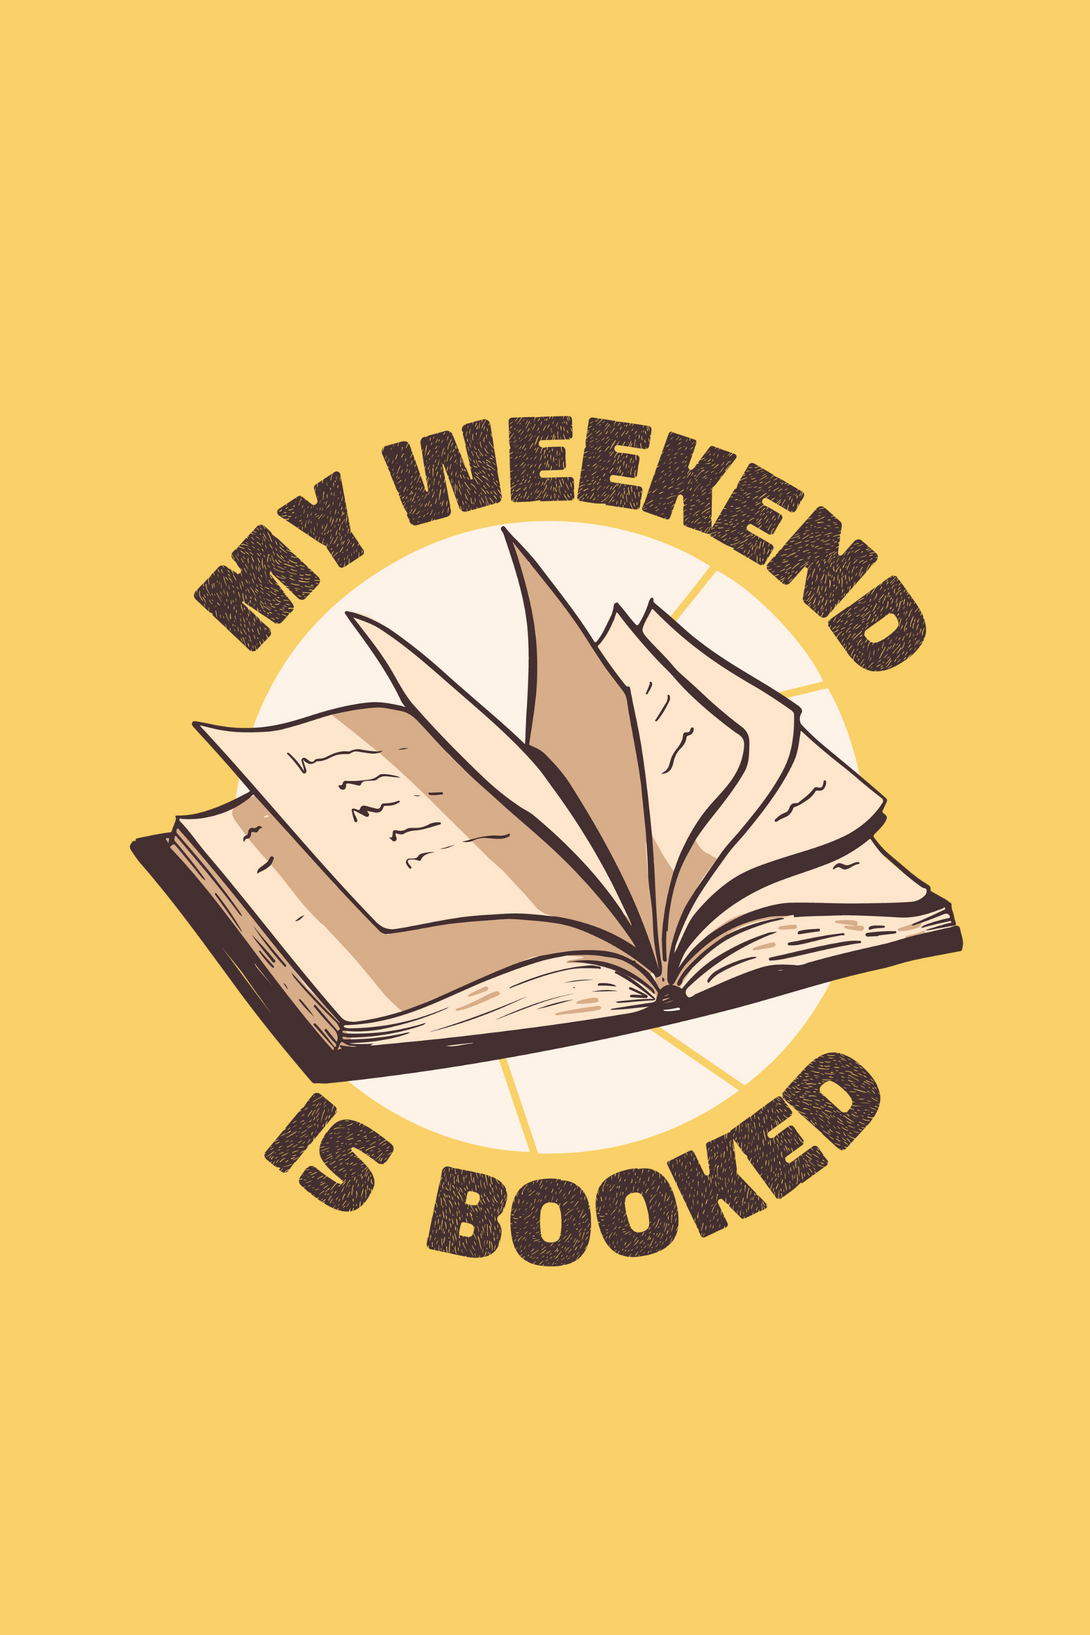 My Weekend Is Booked Printed T-Shirt For Women - WowWaves - 1